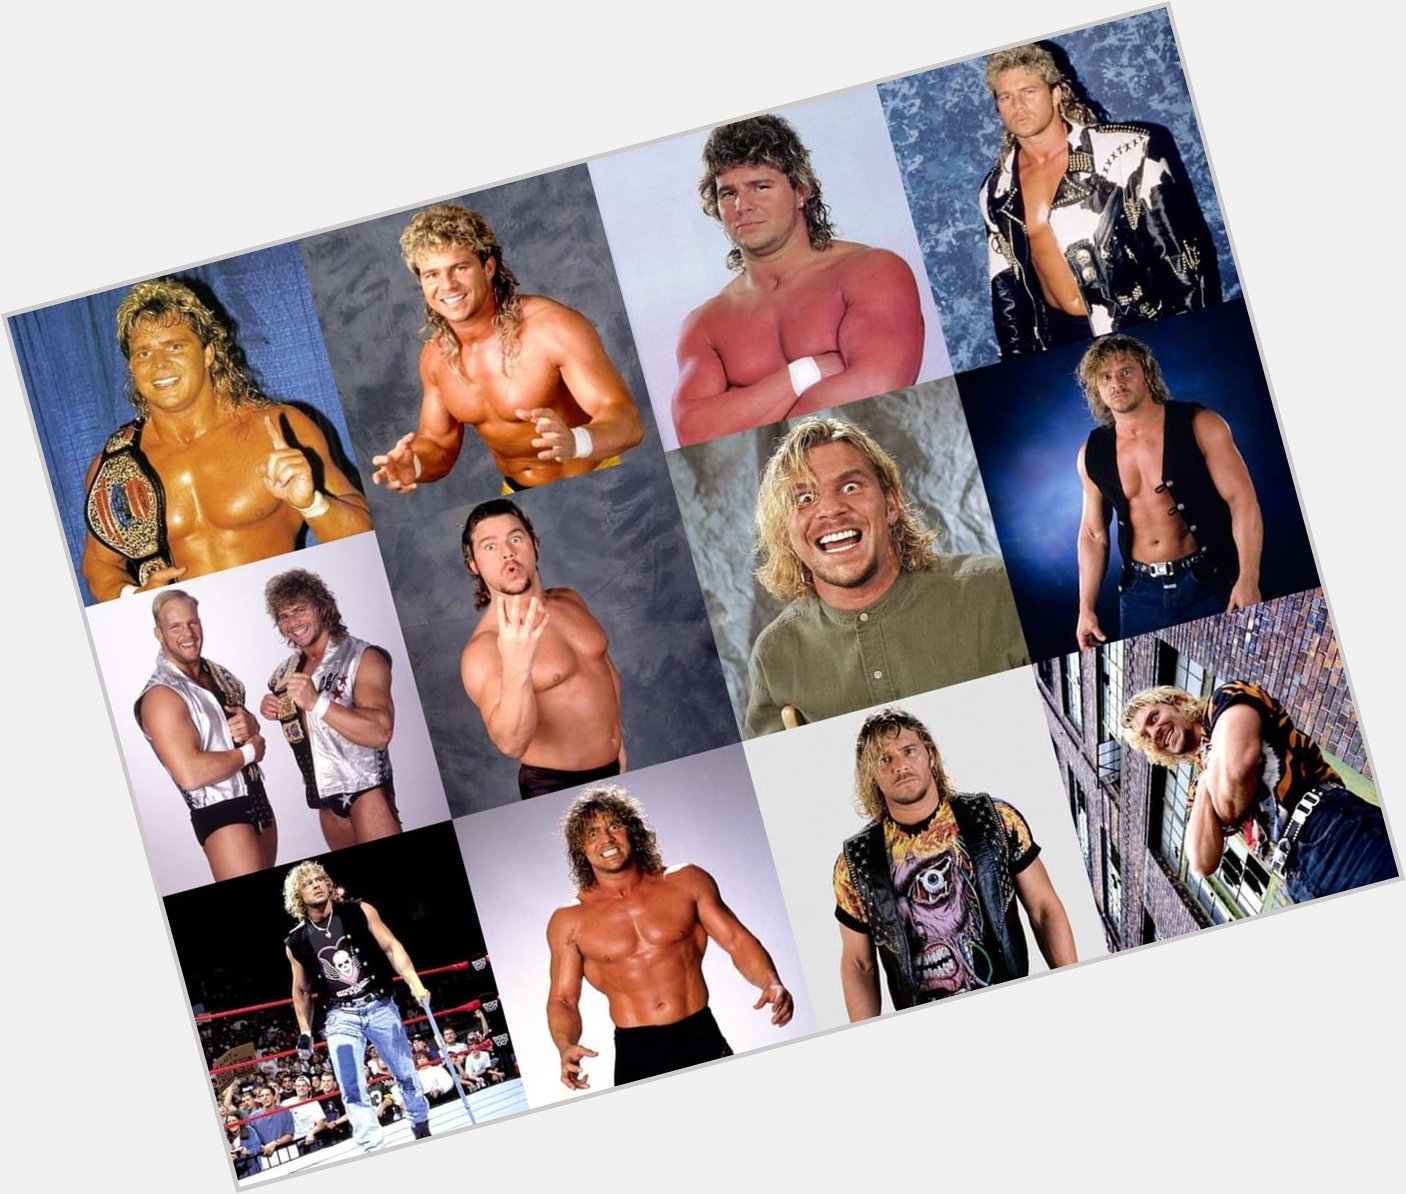 Happy birthday to the late great Brian Pillman.   